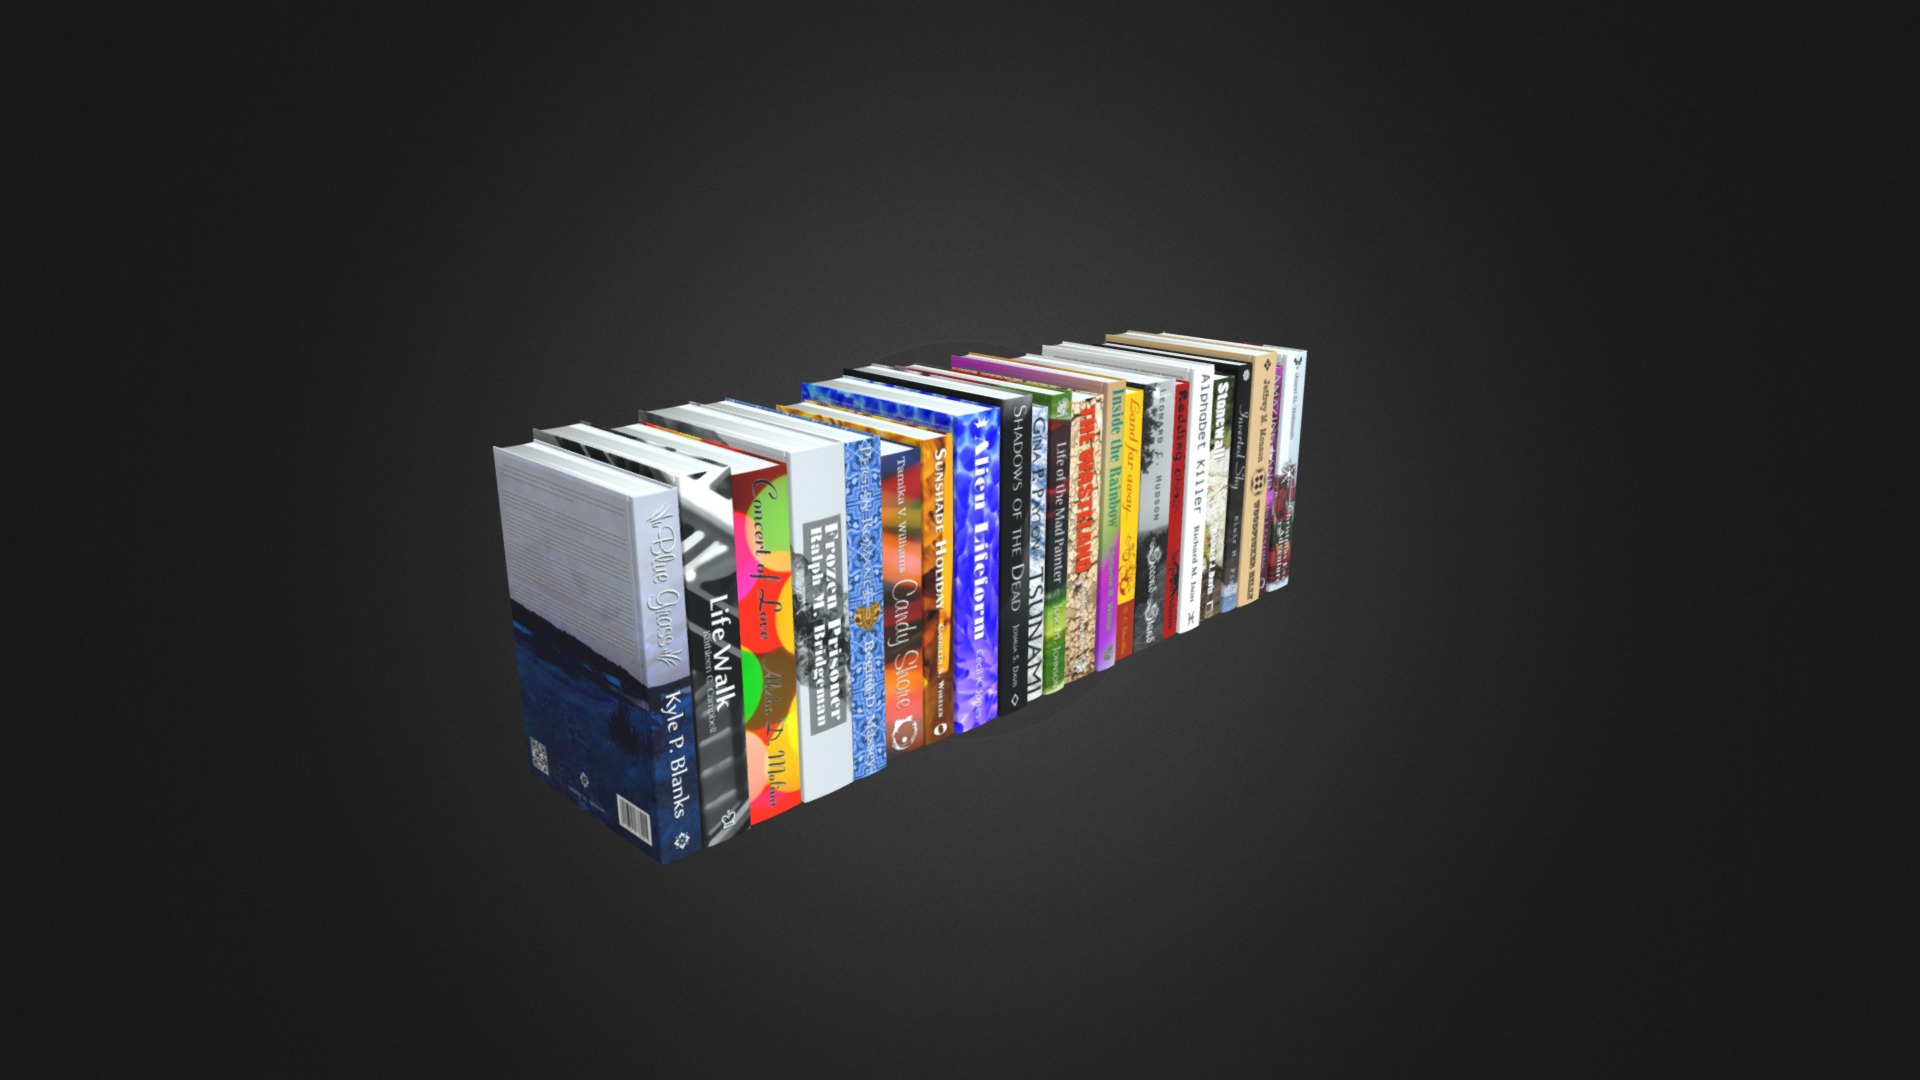 3D model Novel Books 3 - This is a 3D model of the Novel Books 3. The 3D model is about a stack of books.